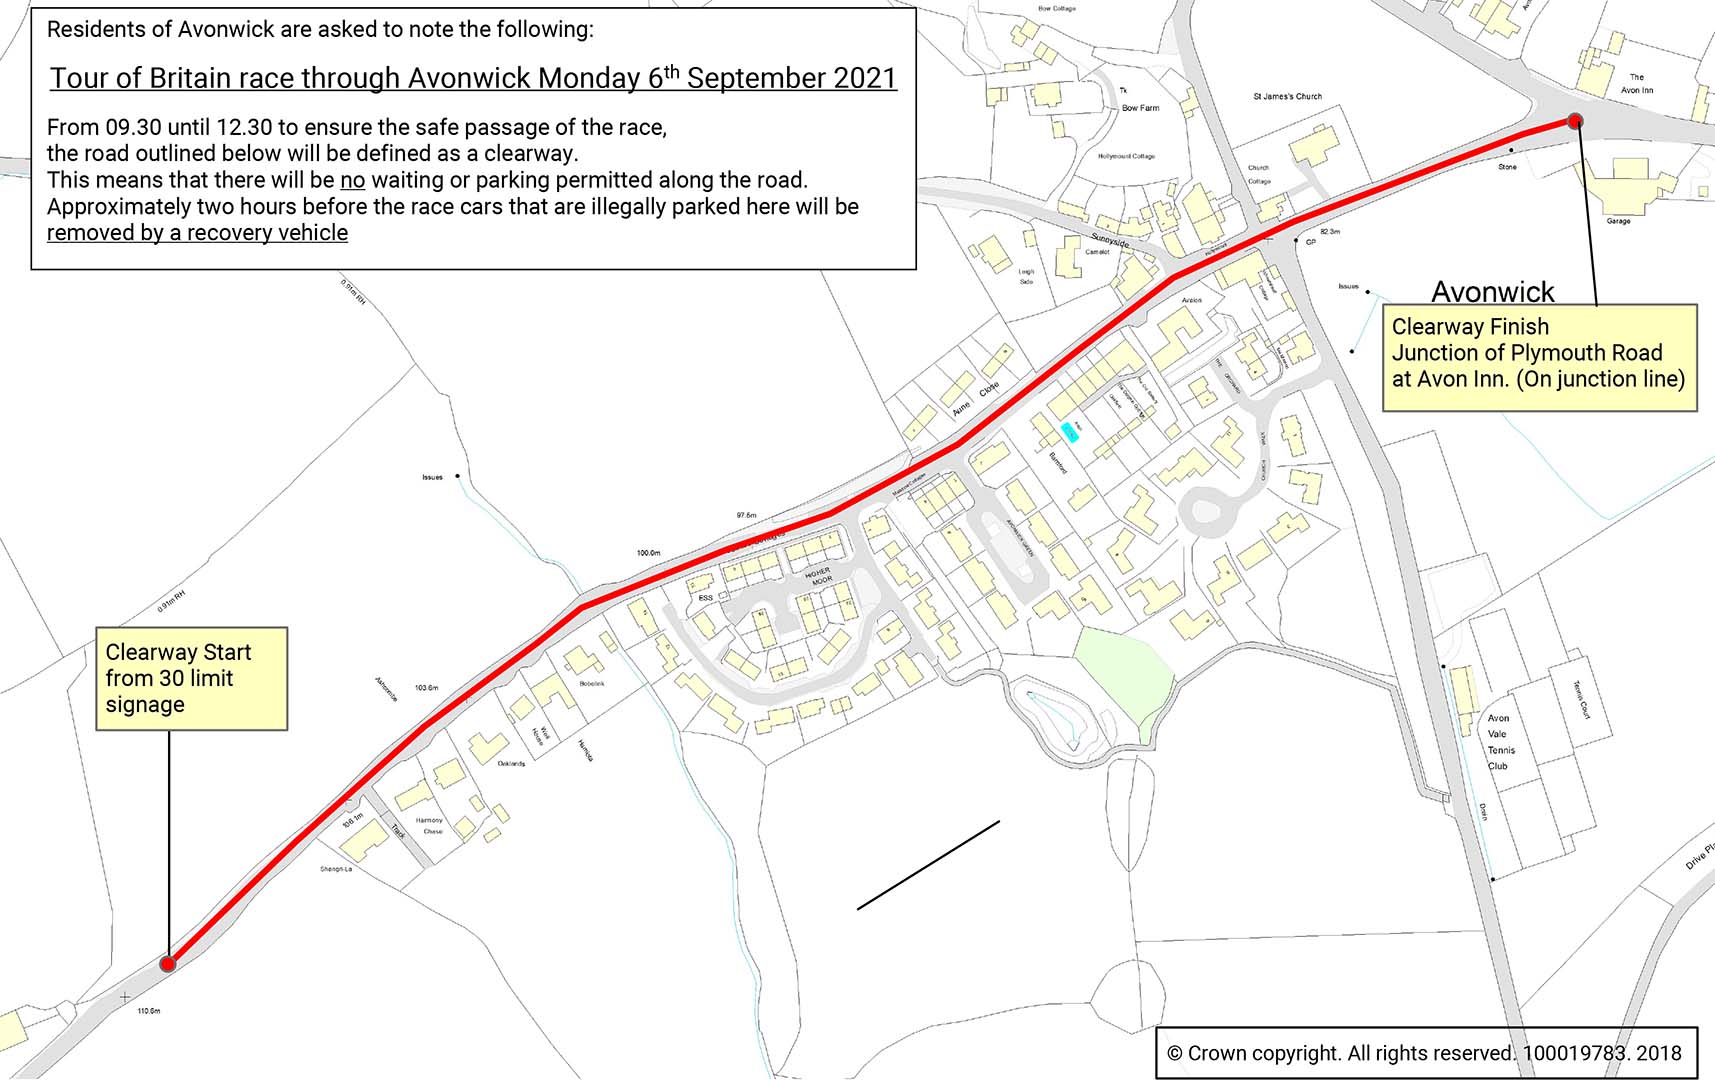 Map showing Clearway in Avonwick on 6th September.